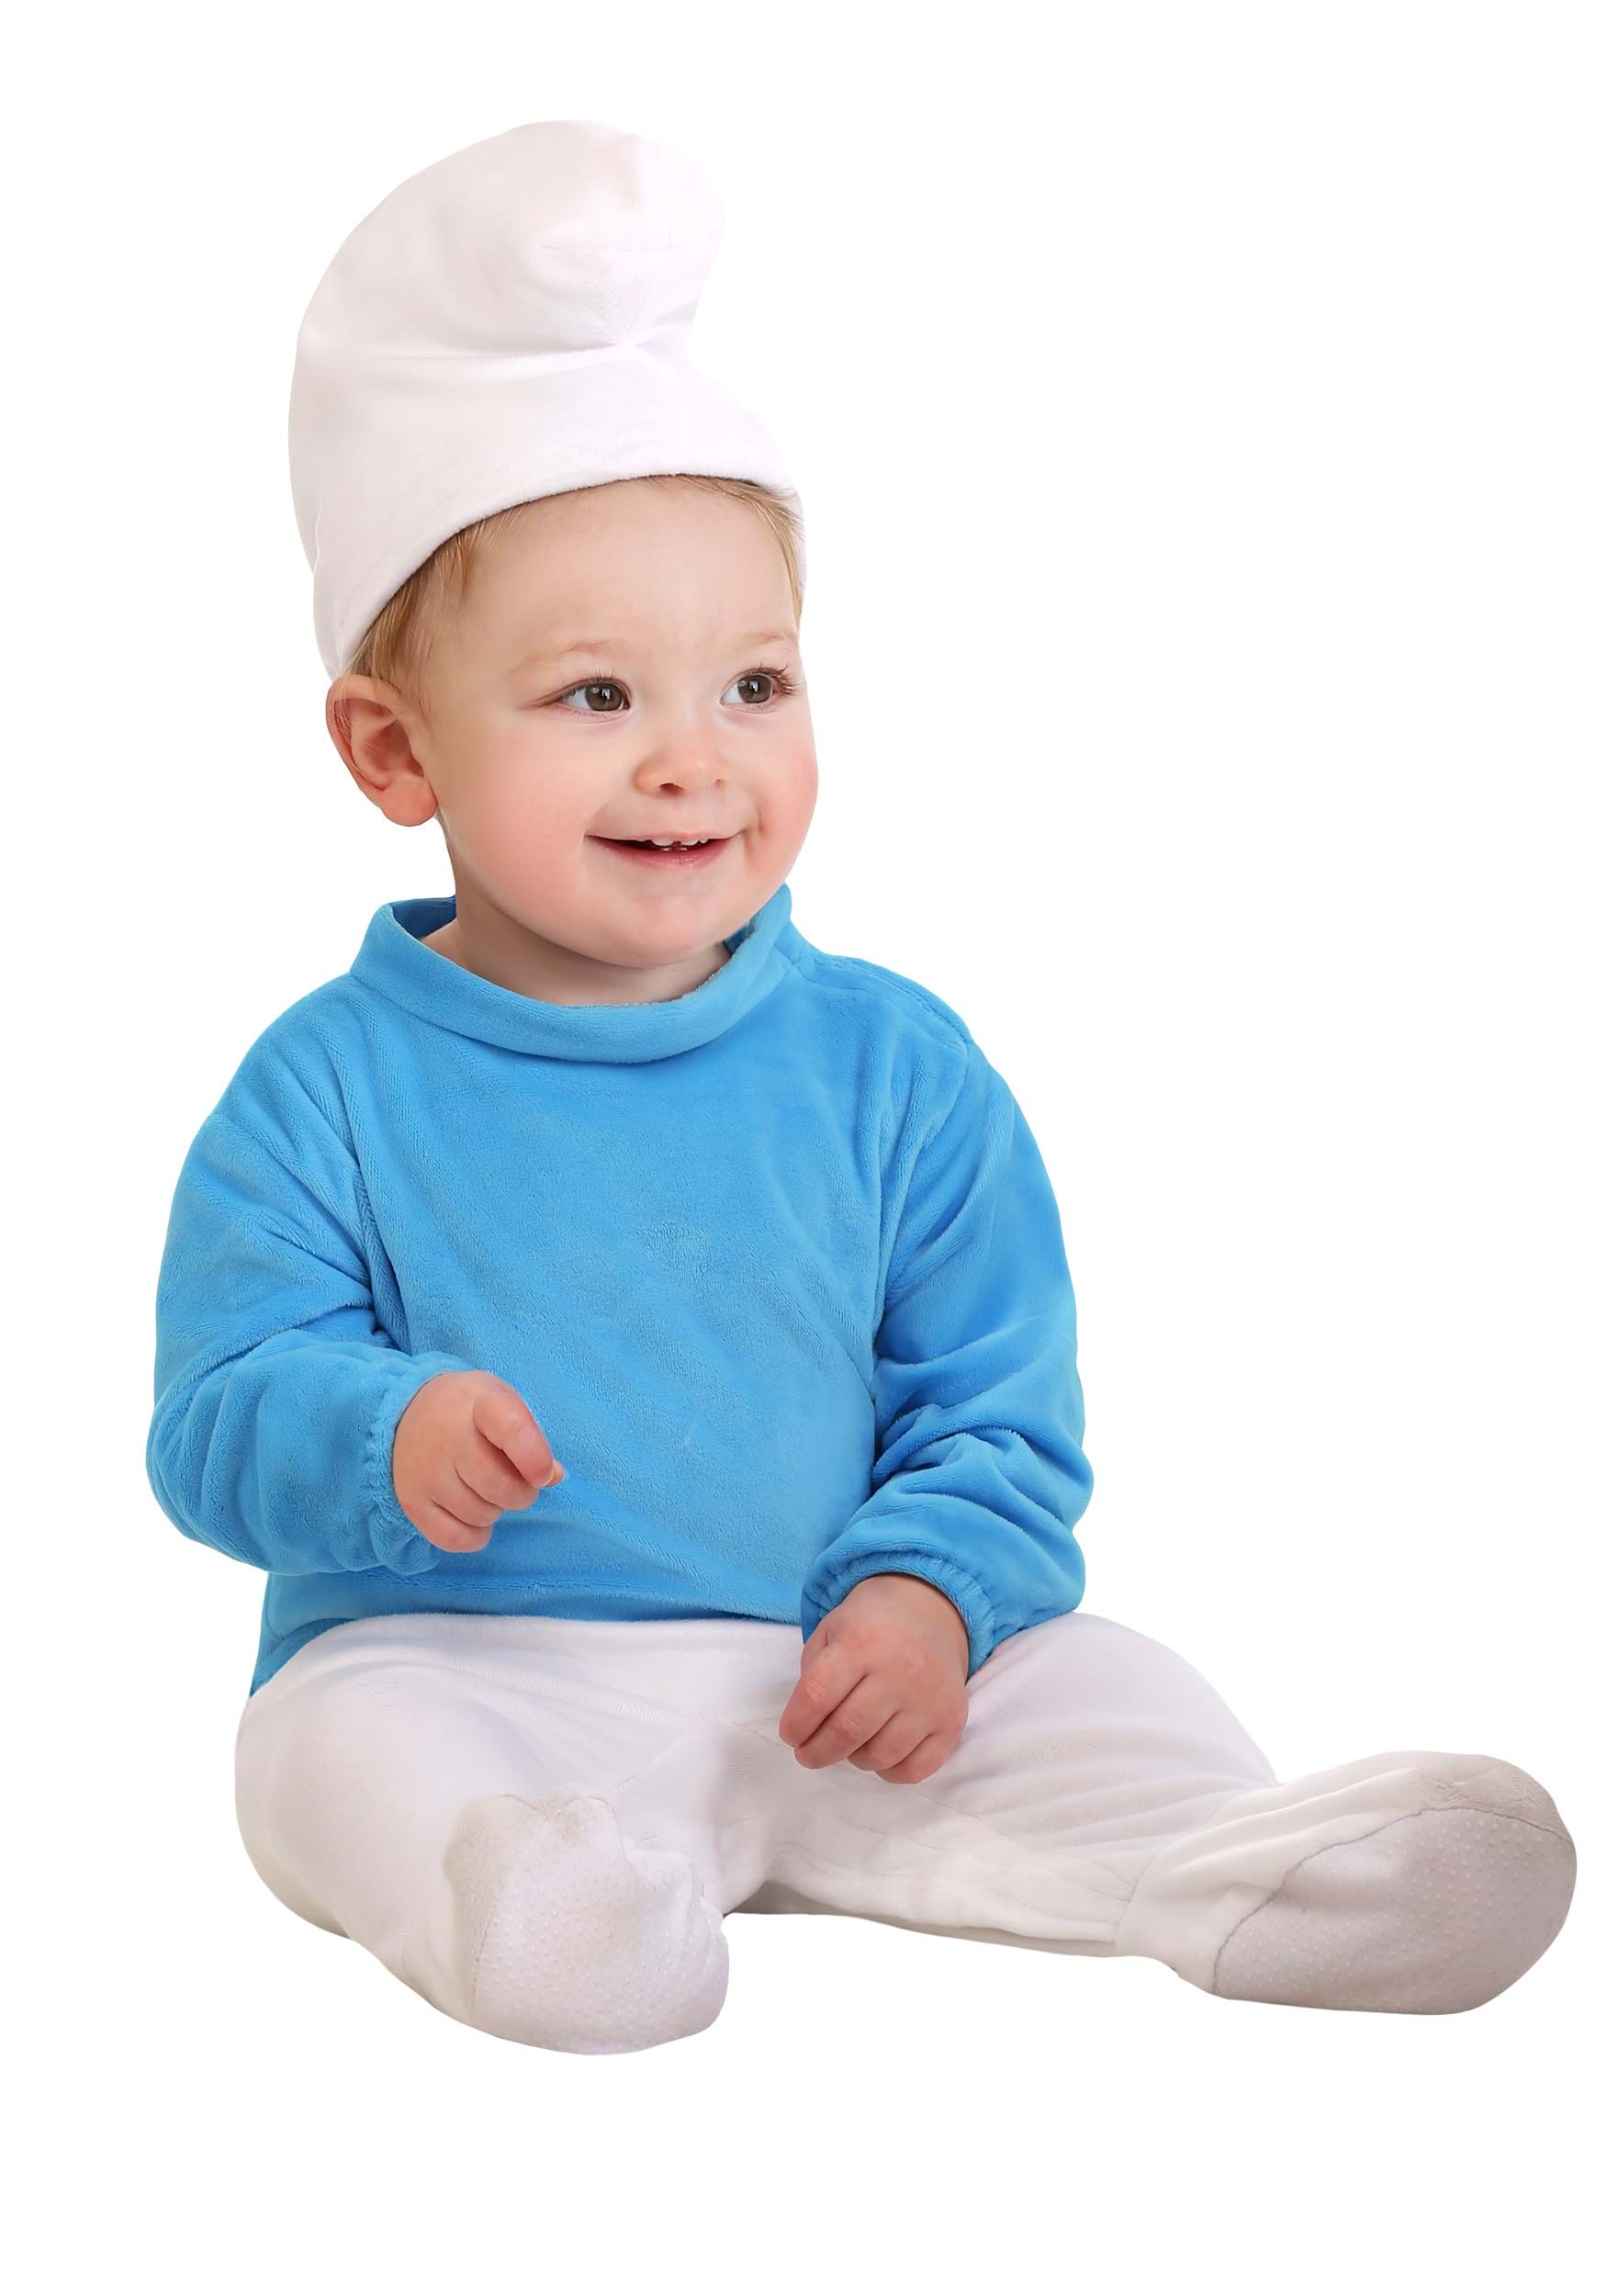 Photos - Fancy Dress FUN Costumes Infant The Smurfs Smurf Costume Blue/White FUN0844IN